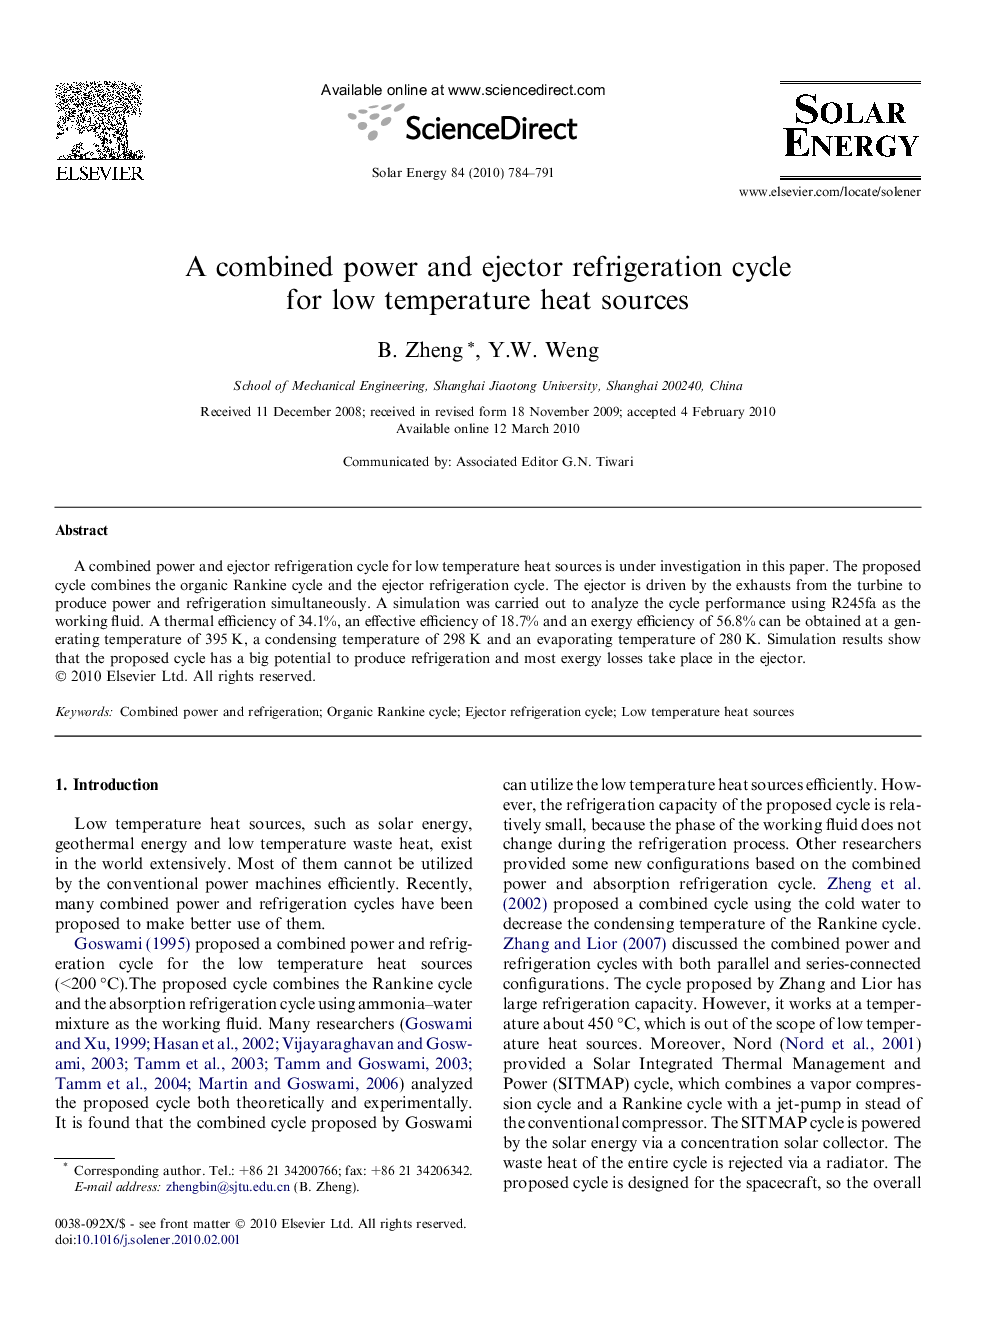 A combined power and ejector refrigeration cycle for low temperature heat sources